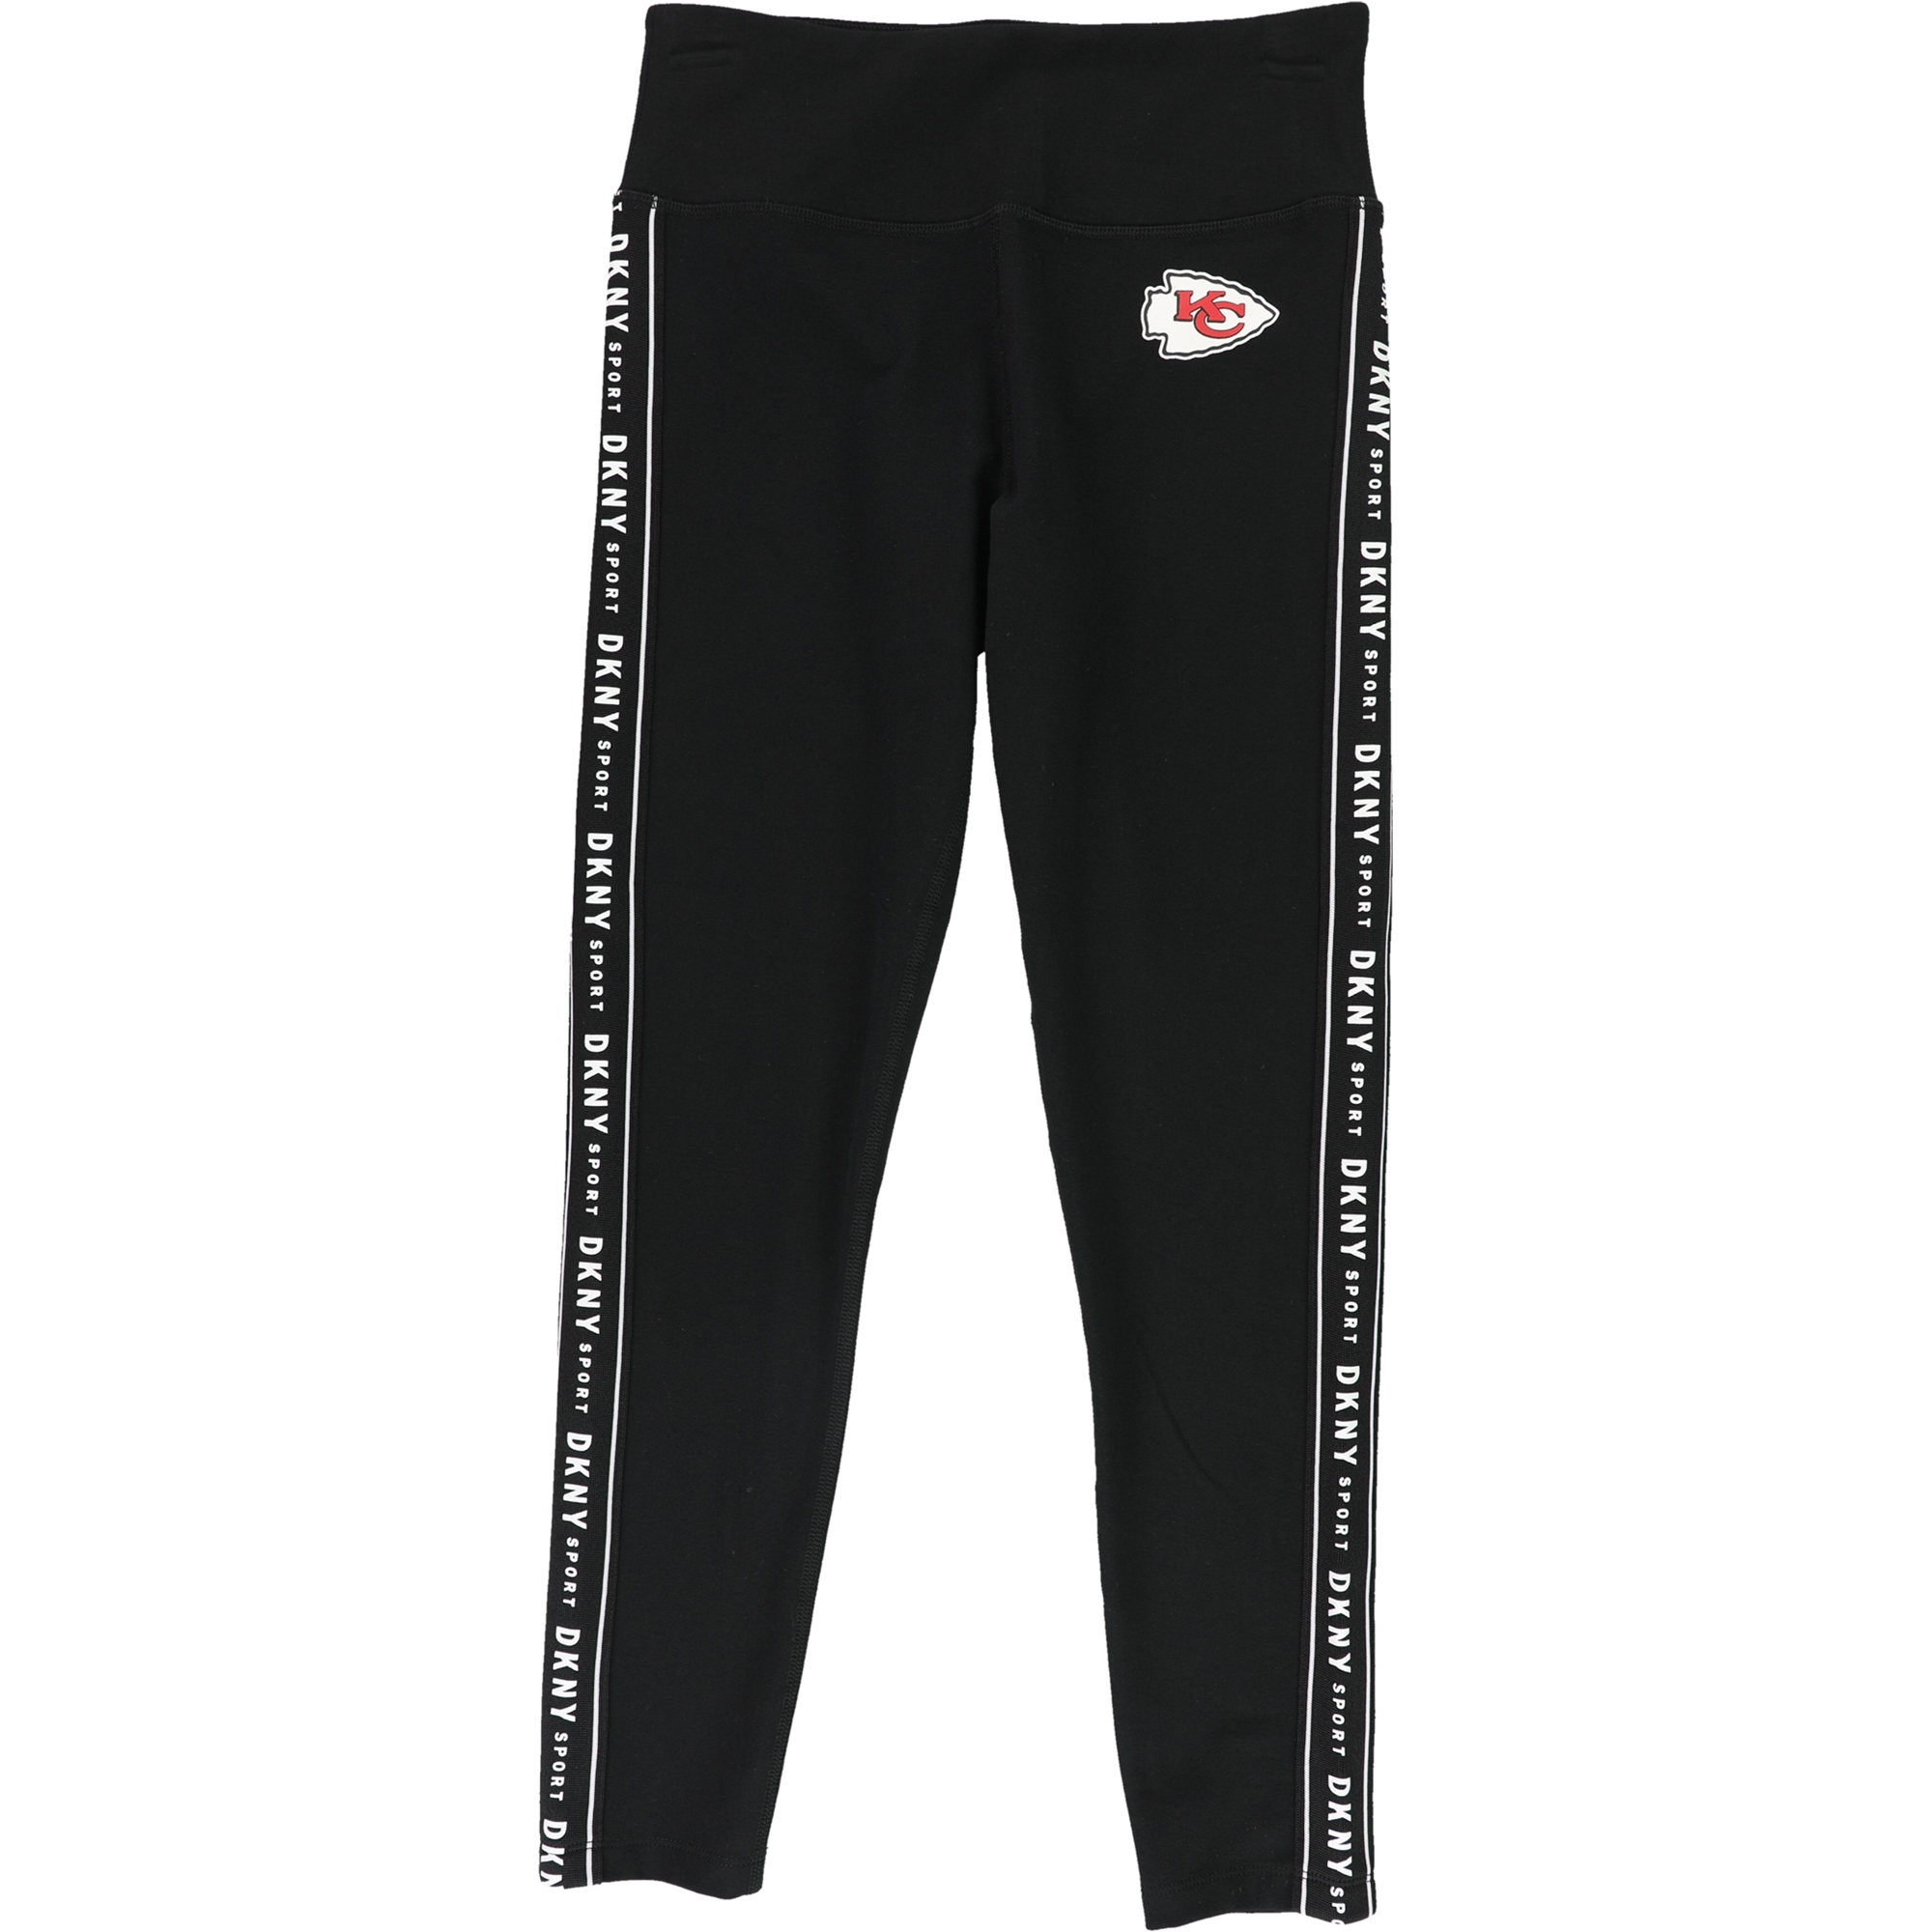 Buy a Dkny Womens Kansas City Chiefs Compression Athletic Pants